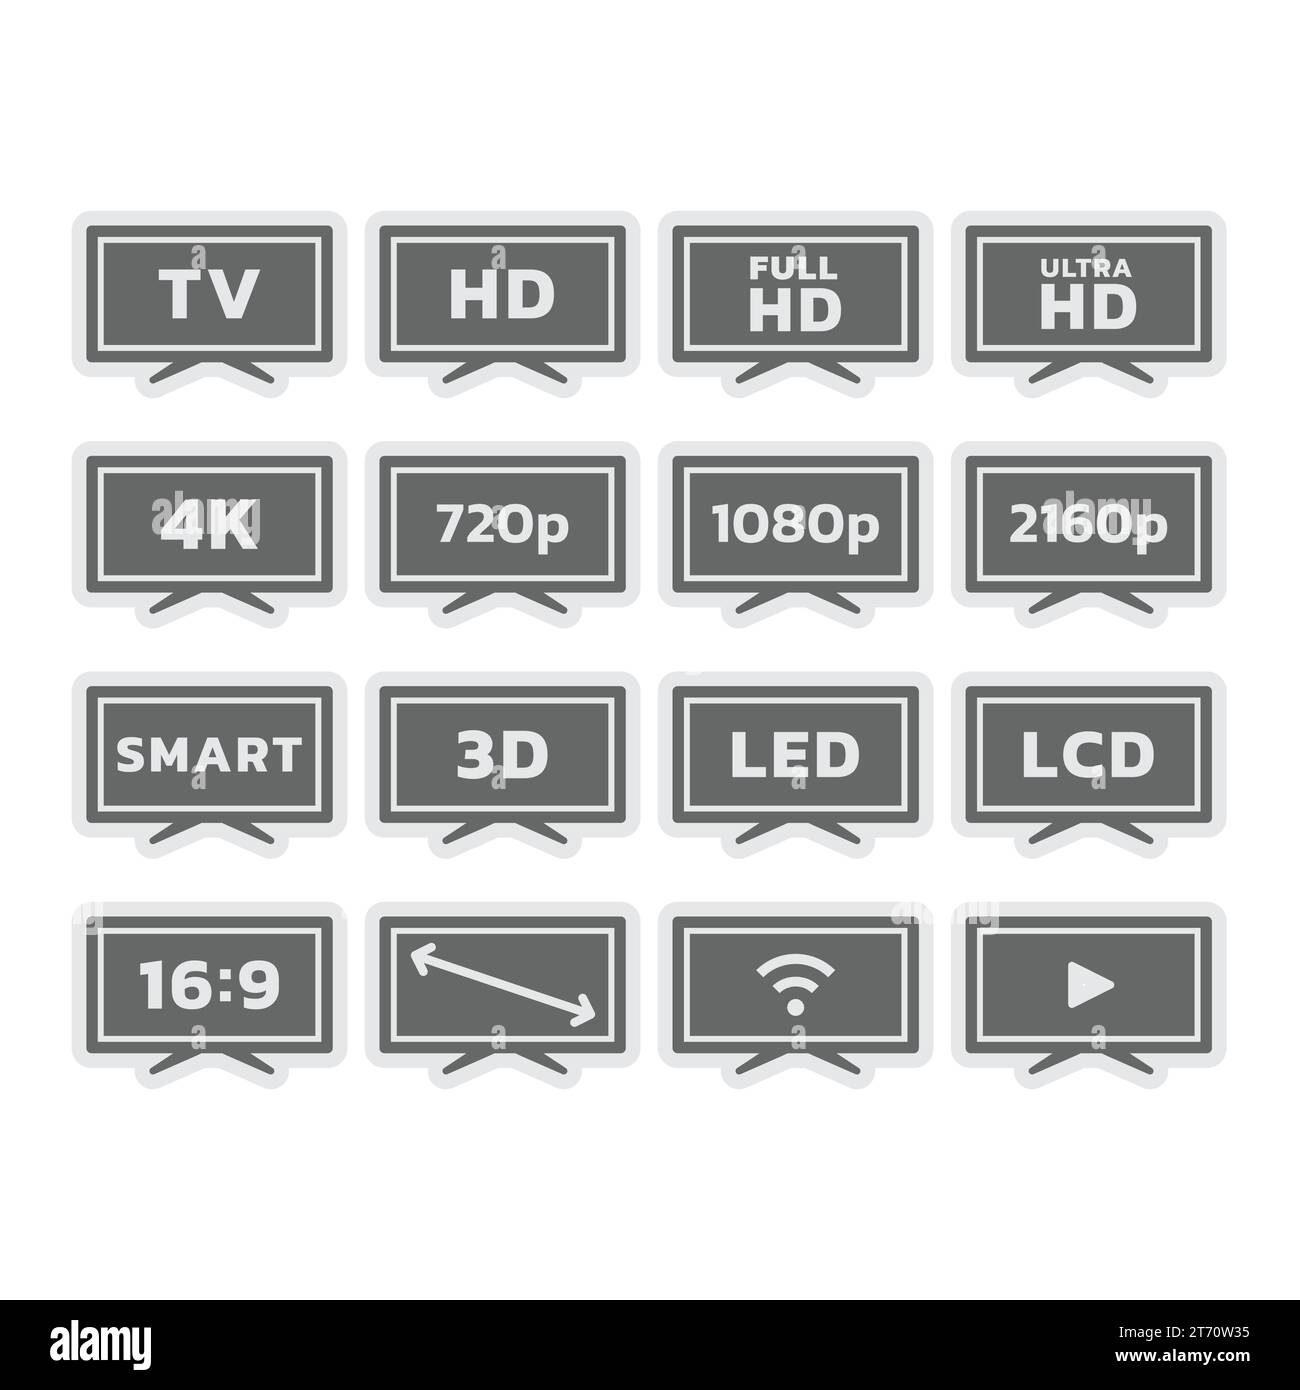 Tv, screen size and resolutions, smart television icons. Full and Ultra HD, Led display, ratio vector icon set. Stock Vector